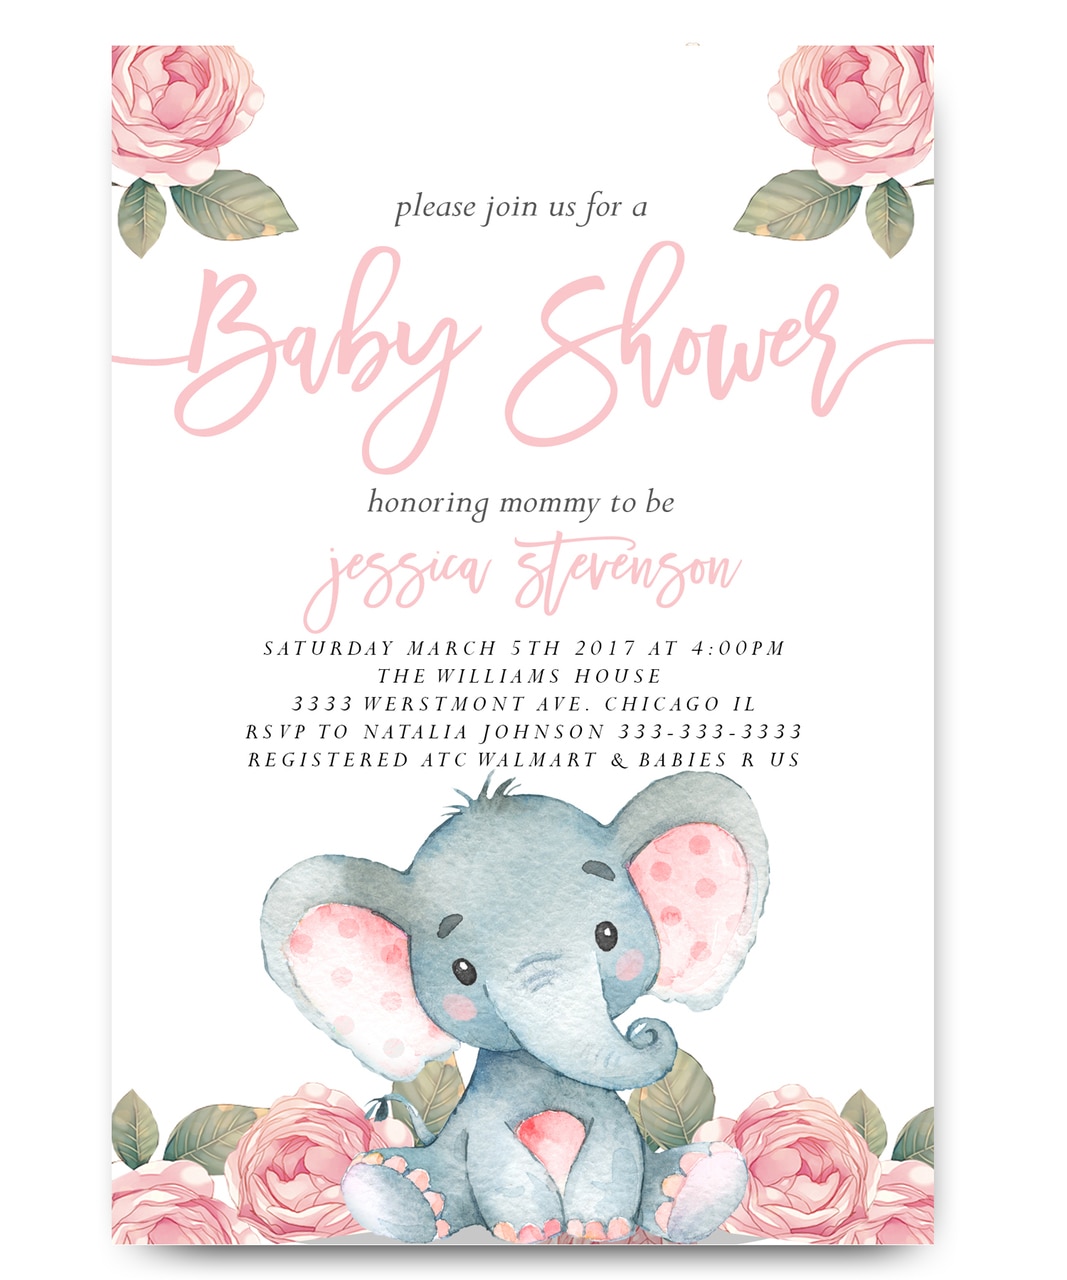 Full Size of Baby Shower:63+ Delightful Cheap Baby Shower Invitations Image Inspirations Cheap Baby Shower Invitations Elephant Baby Shower Invitationelephant With Flowers Elephant Pink Elephant Elephant